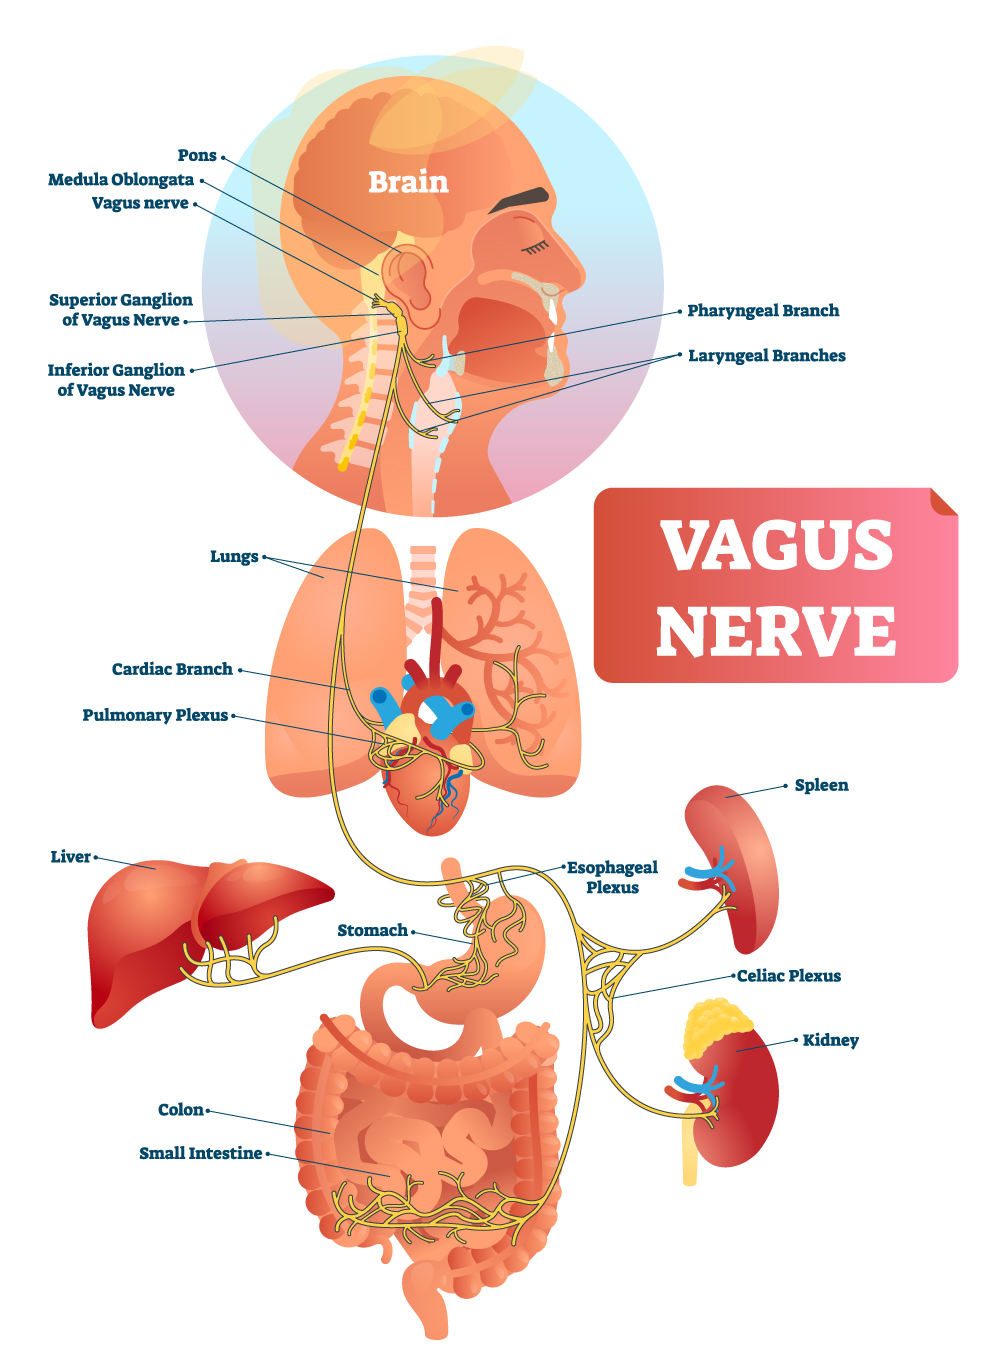 Image of the organs our vagus nerve signals to the brain